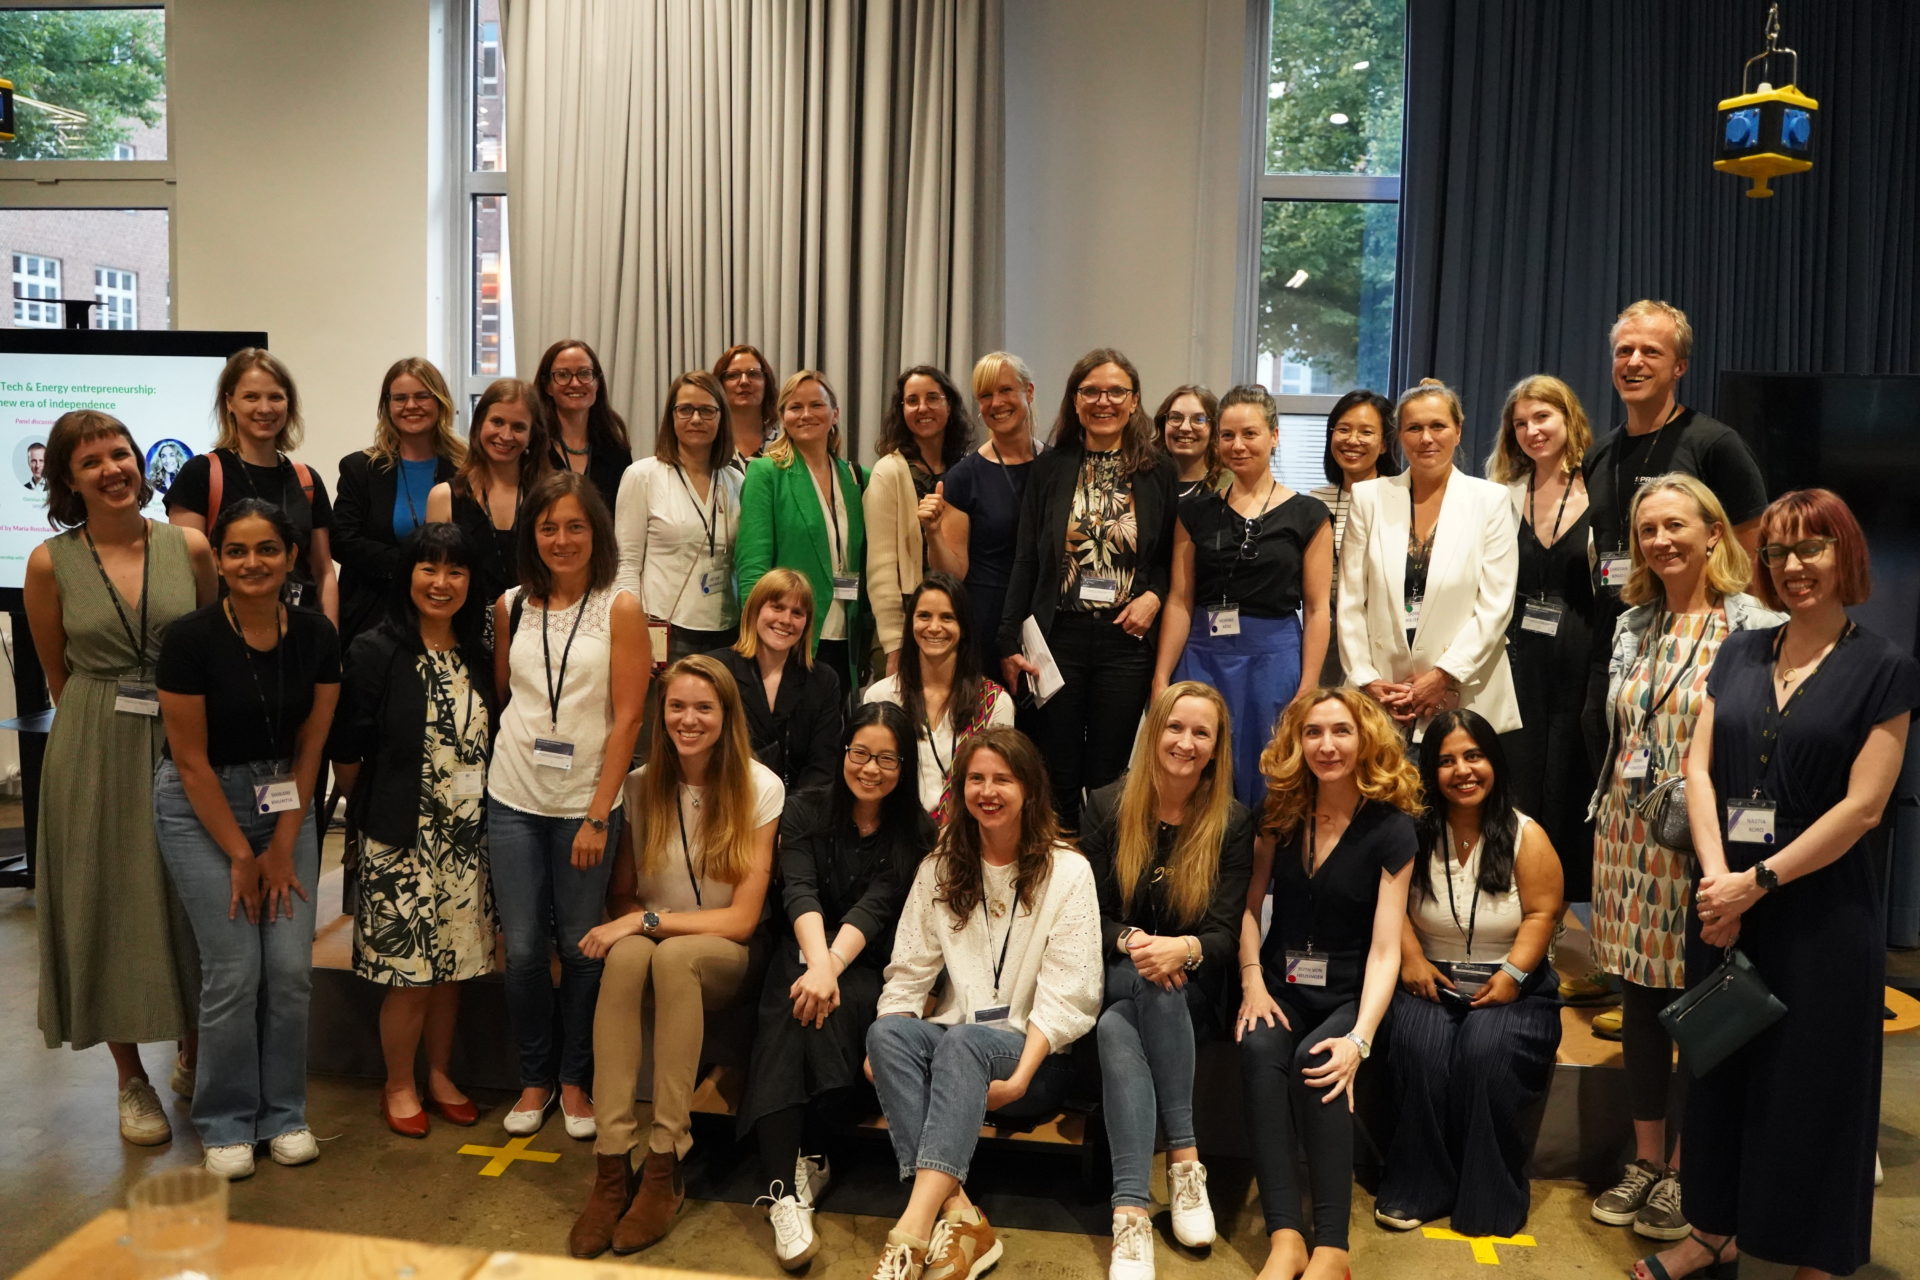 A group photo of the participants at the Women in Green Tech event